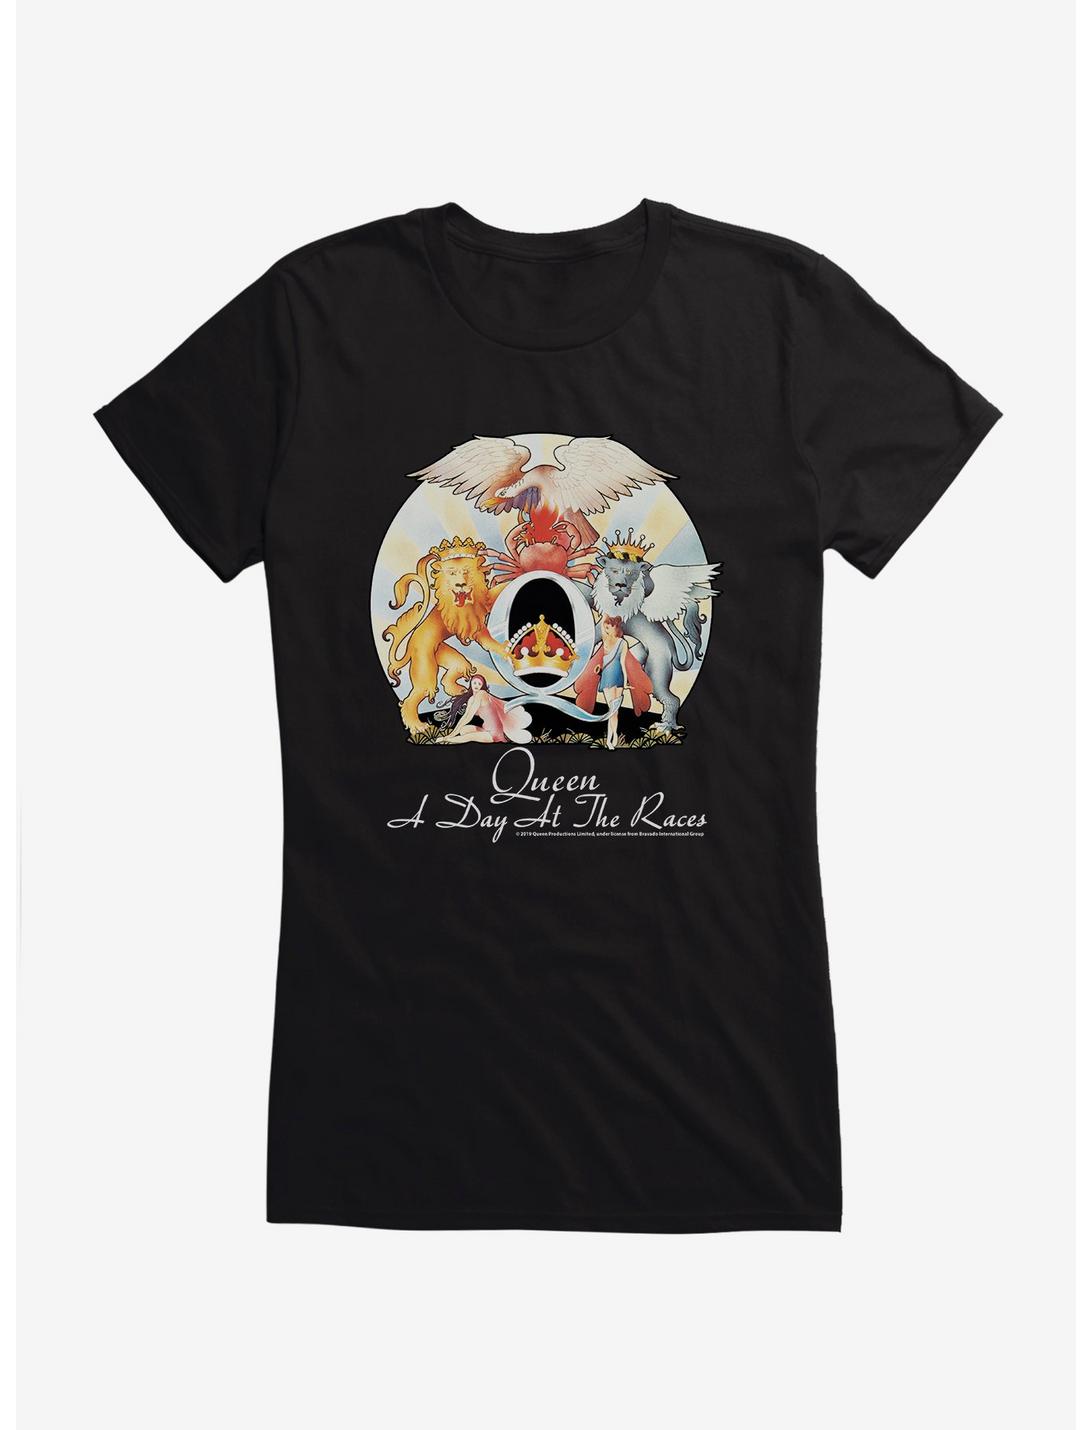 Queen A Day At The Races Girls T-Shirt, , hi-res